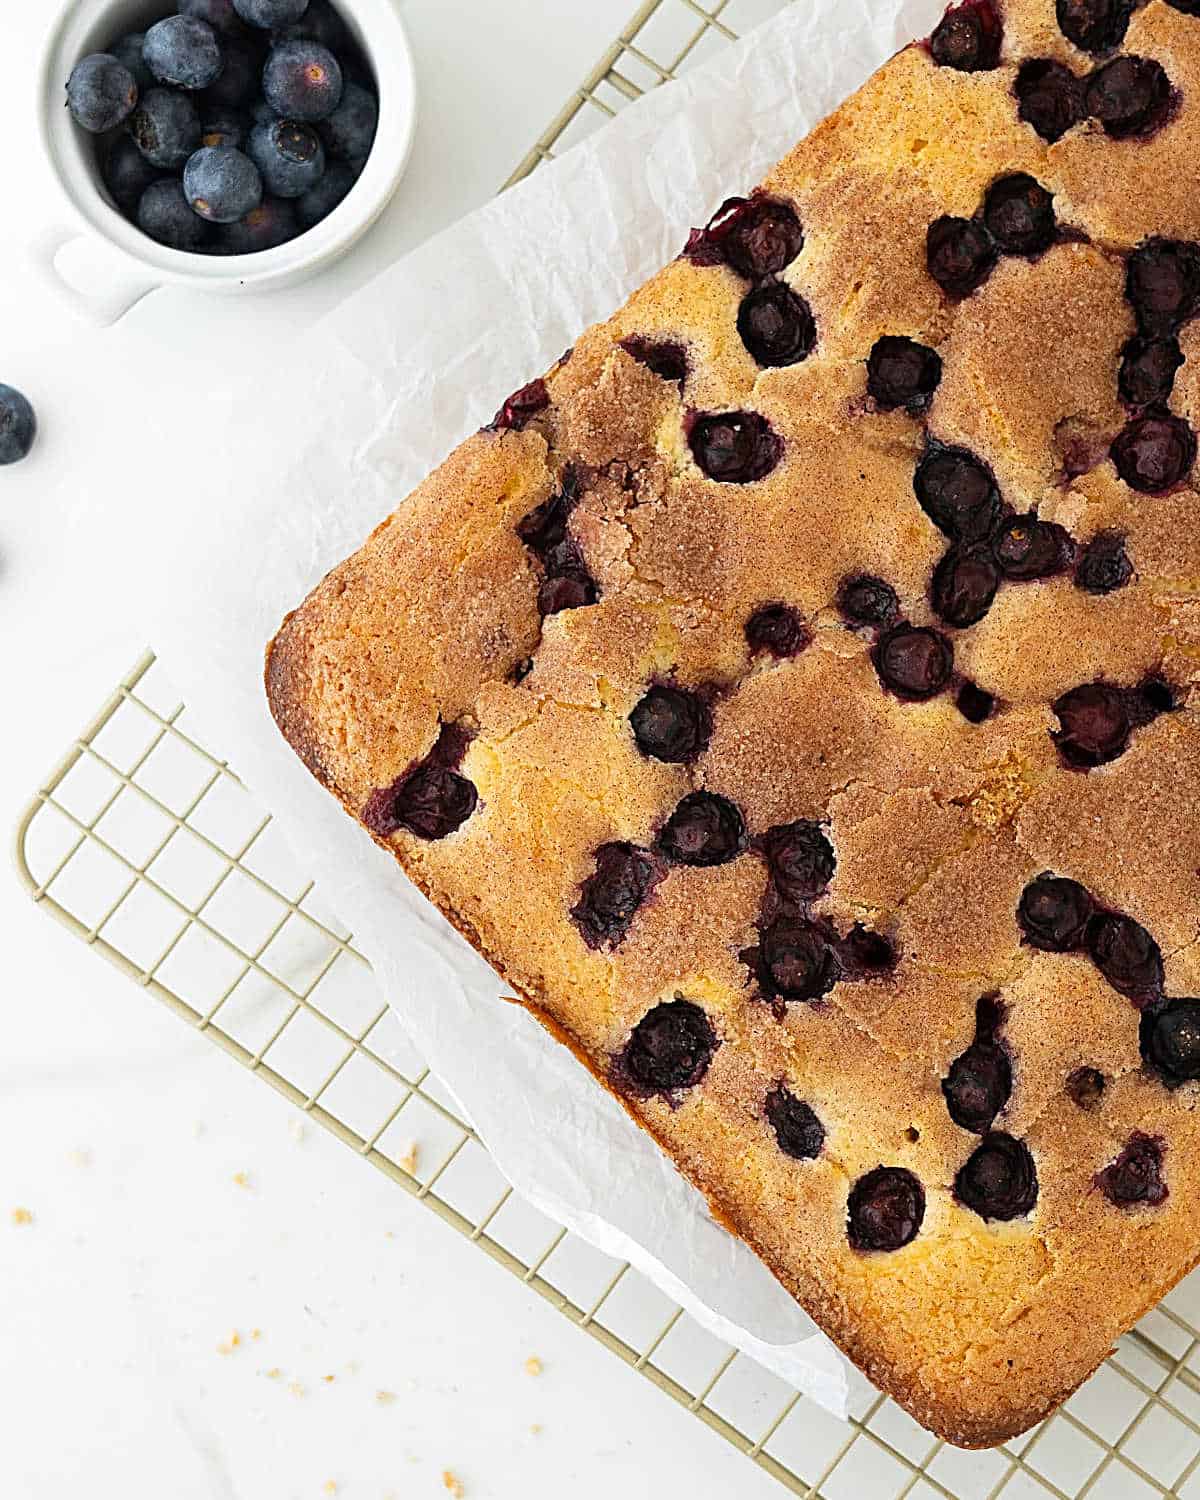 Baked blueberry coffee cake on a wire rack. White surface. Bowl of blueberries.